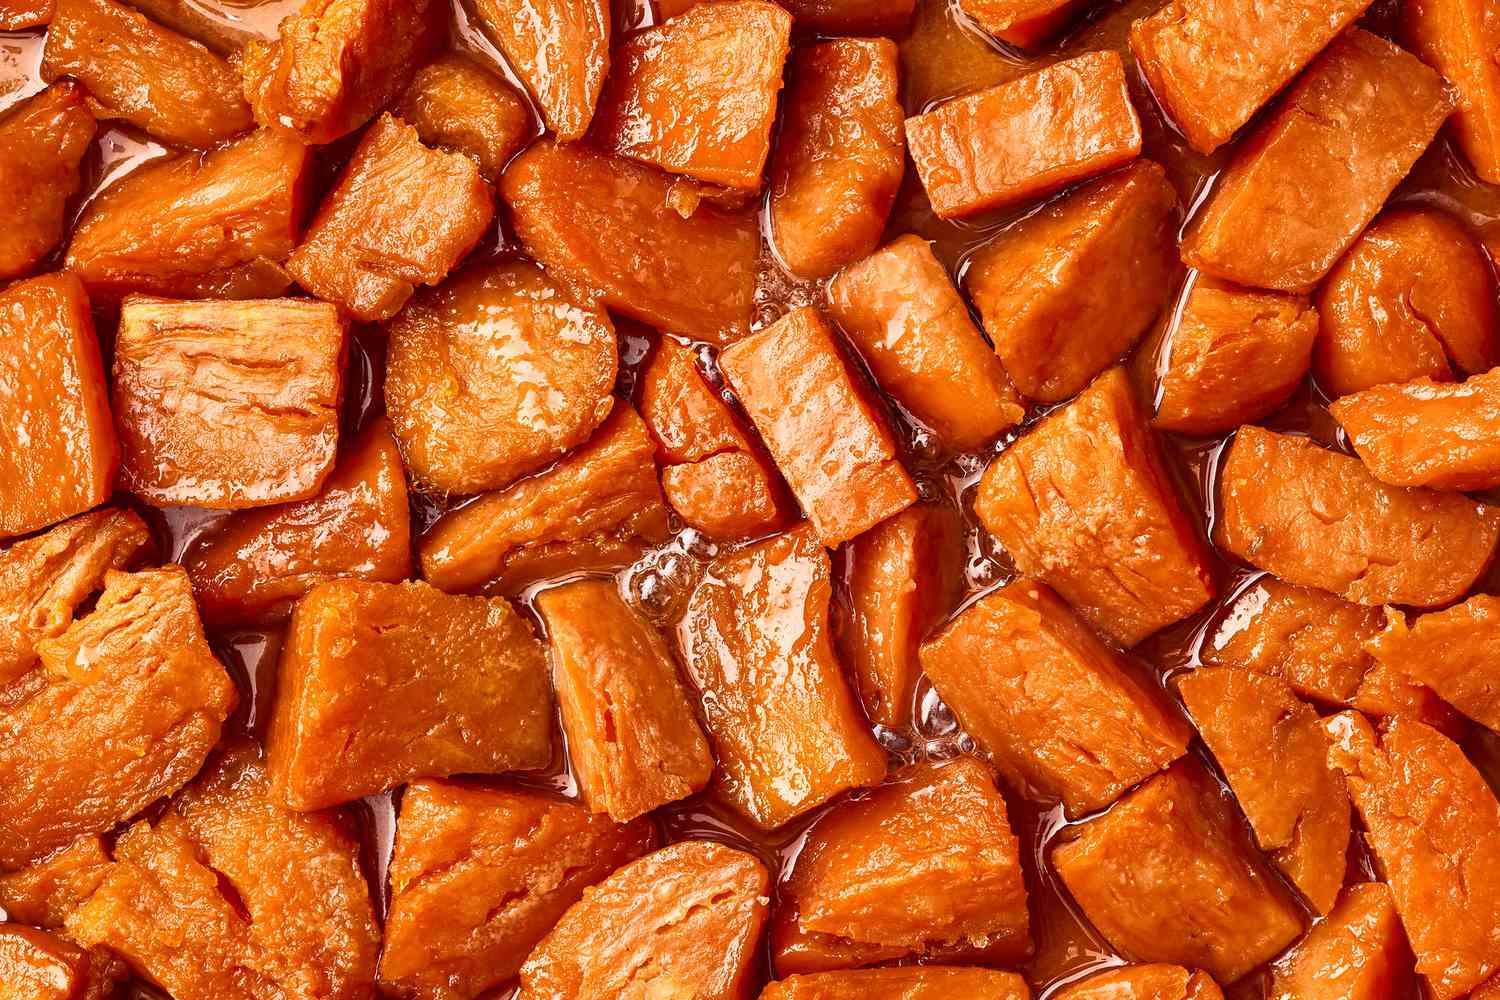 for-the-best-candied-yams-make-a-proper-syrup-first